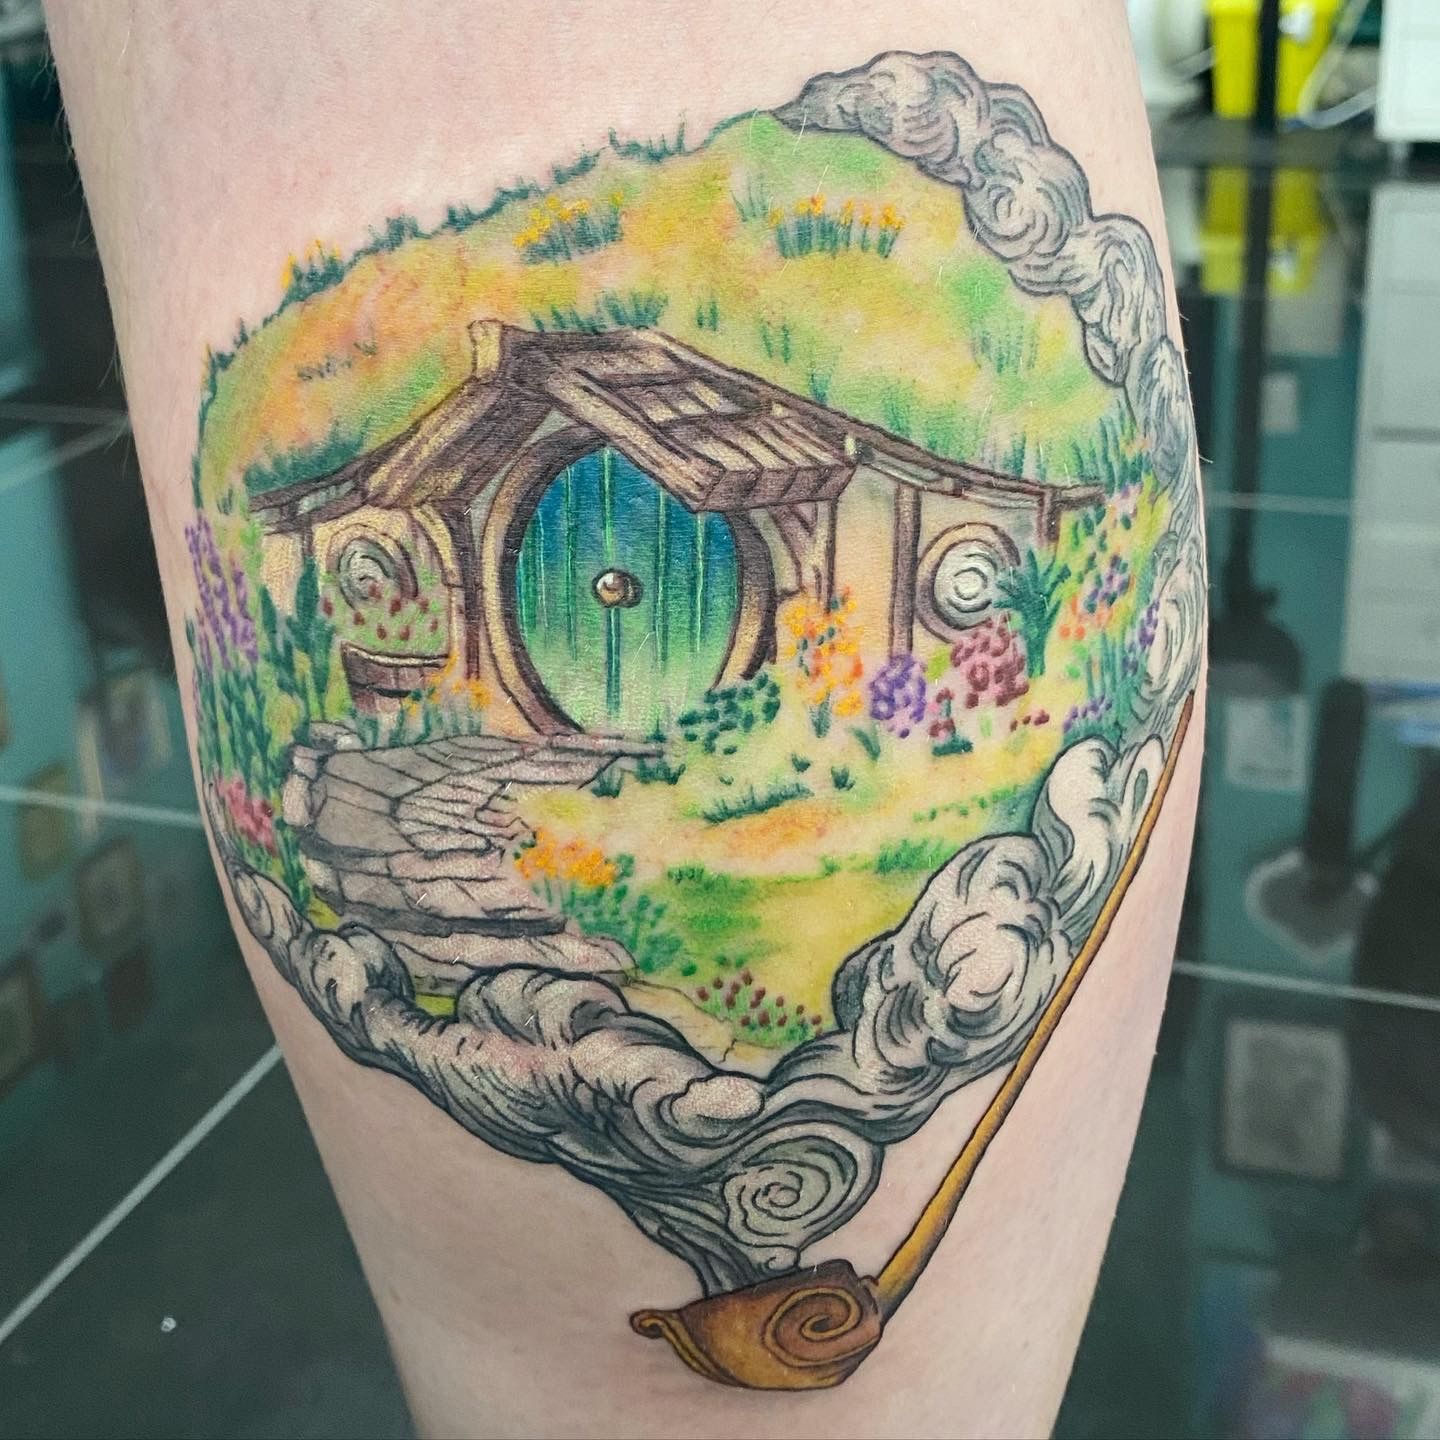 Human Canvas  Lil Hobbit hole tattoo done by Adrianne shurinaart  today  Facebook